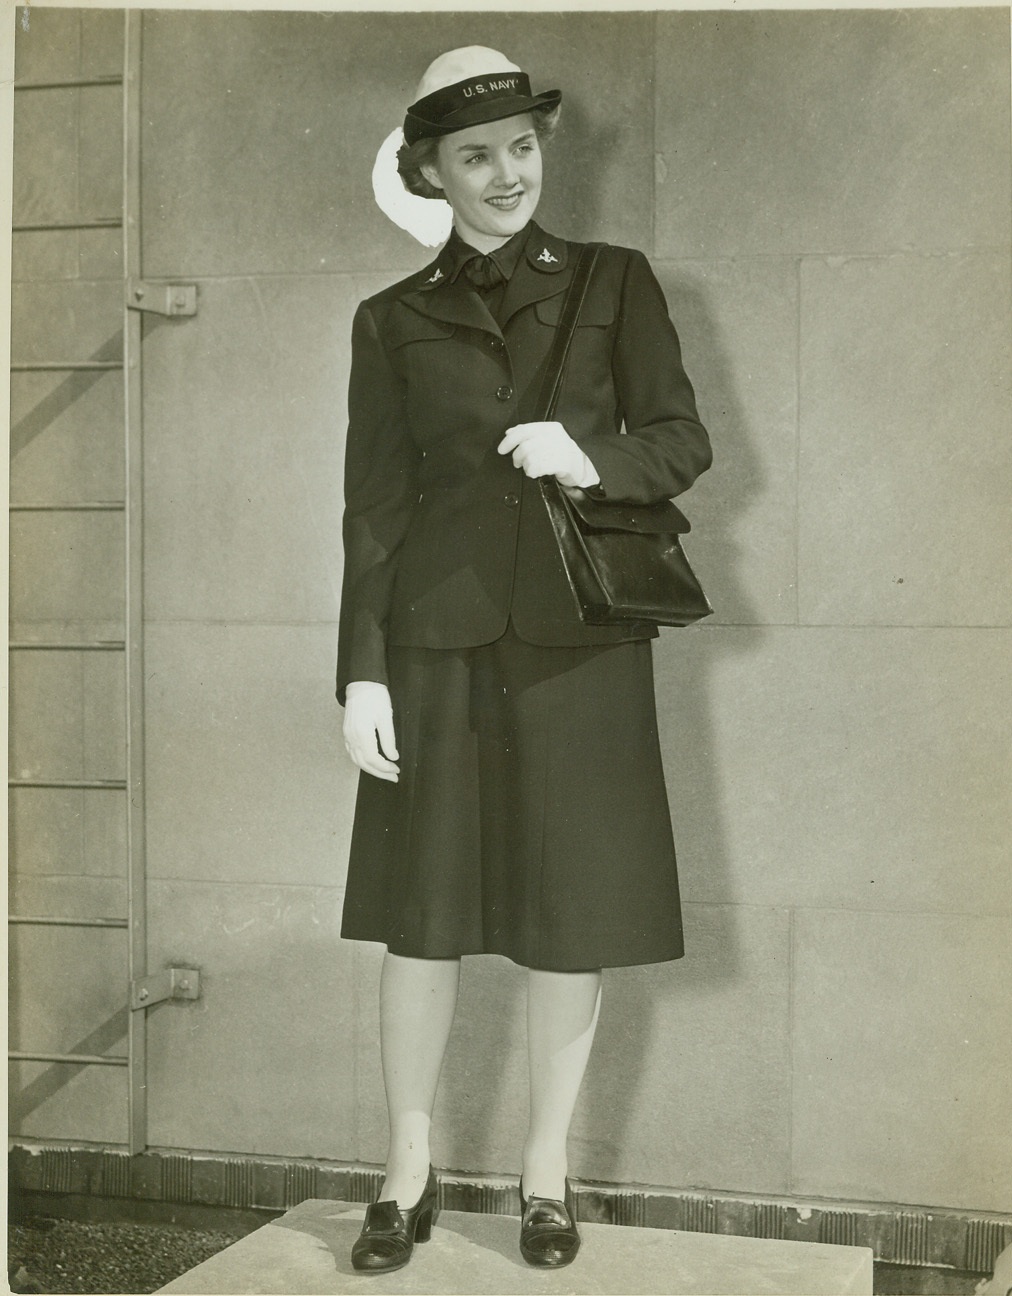 Uniform of WAVES’ Enlisted Personnel, 10/1/1942. NEW YORK – The enlisted personnel of the WAVES will wear a uniform exactly like that of their commanding officers’ except that black buttons take the place of gold, and rating marks on the upper sleeve supplant gold braid. The skirt is exactly the same, and the hat has a six section crown with wide stitched brim and a white crown for summer wear, replaced by a blue crown for winter. Both hats have a black band with “U.S. Navy” in gold. The Mainbocher designed uniform is modeled by Miss Ellen Allardice. Credit: (ACME);